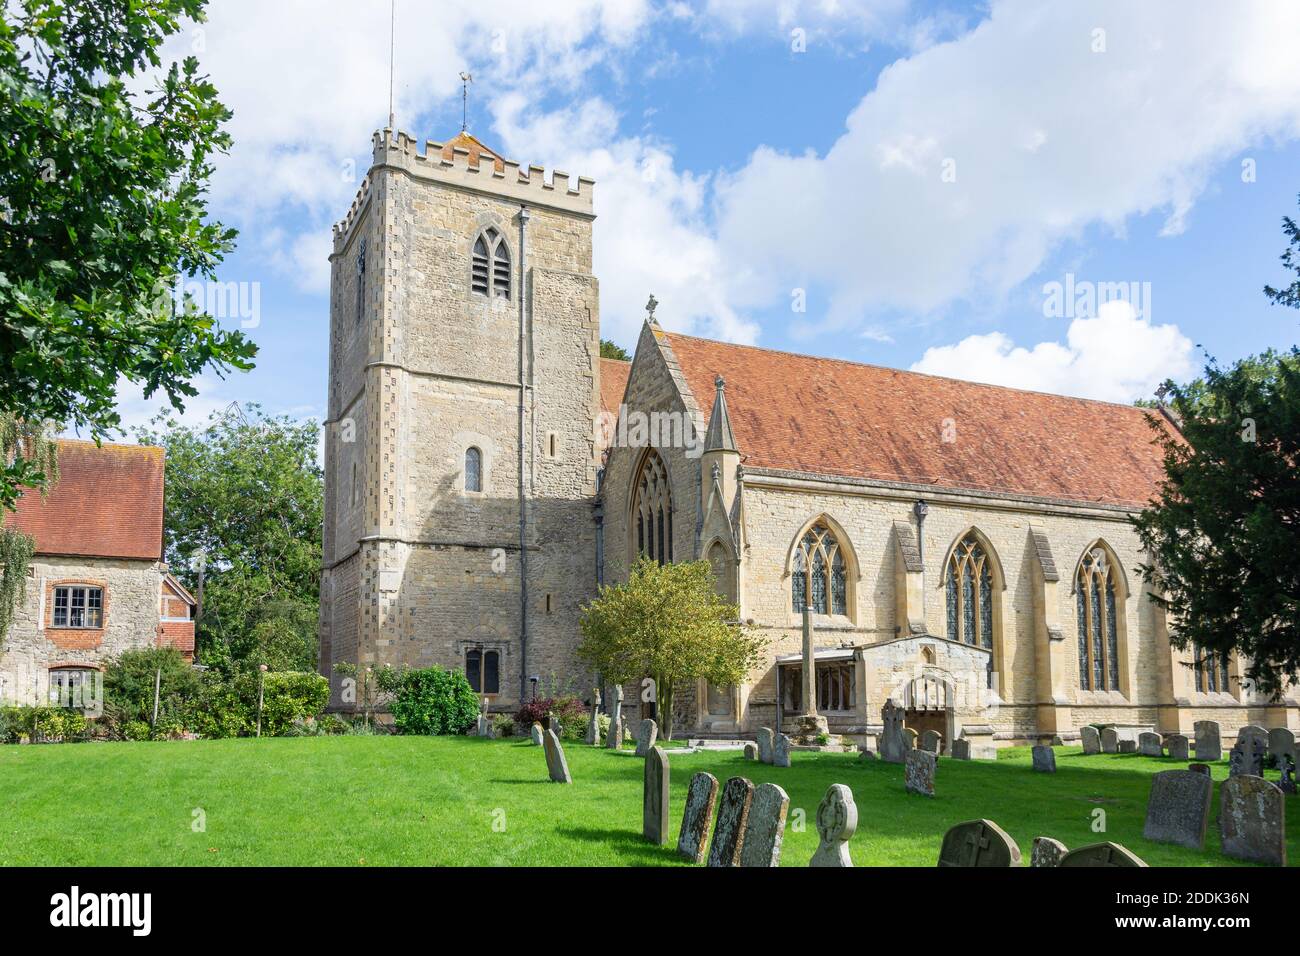 Abbaye de St Peter & St Paul, High Street, Dorchester-on-Thames, Oxfordshire, Angleterre, Royaume-Uni Banque D'Images